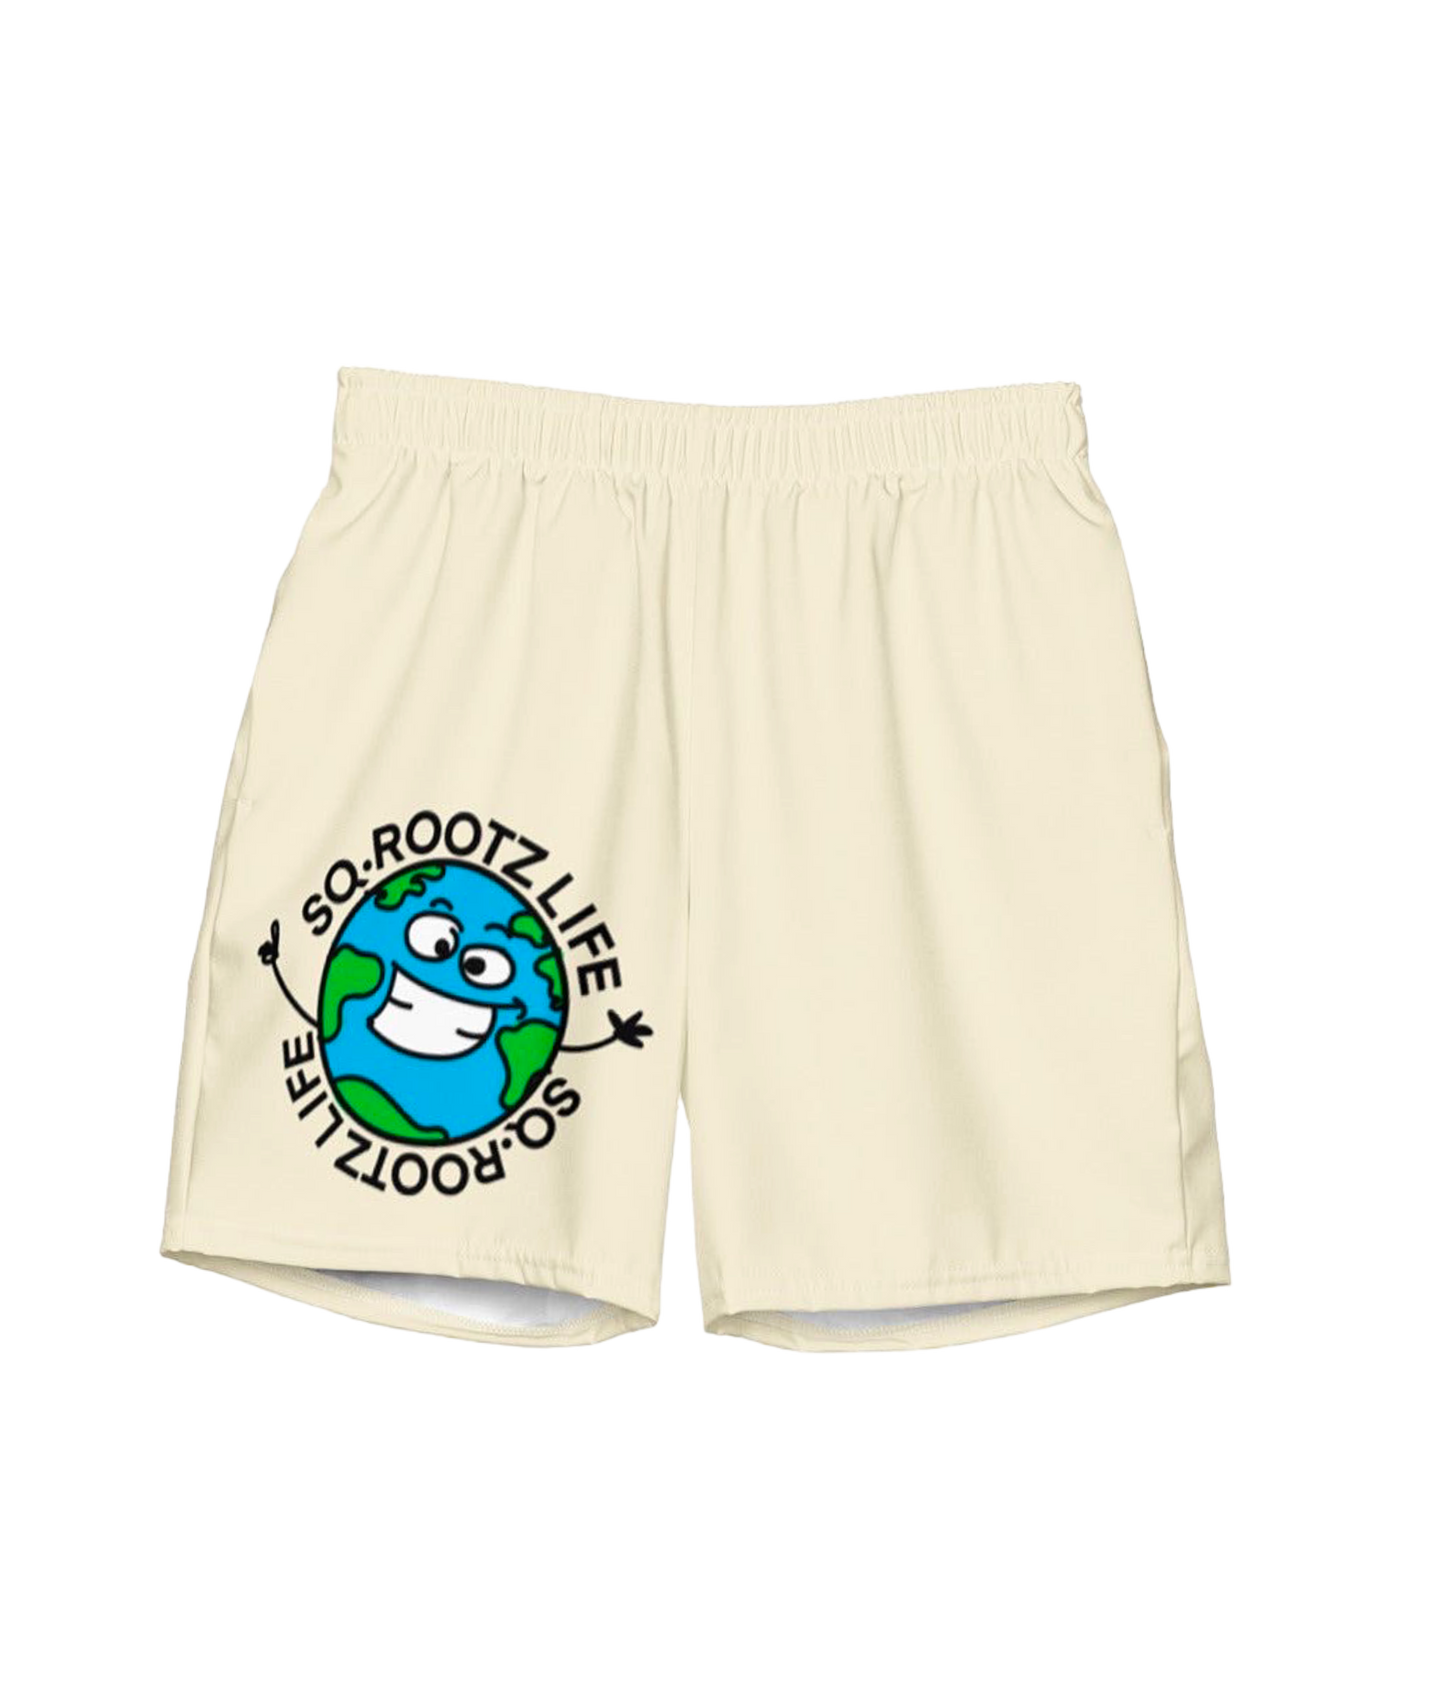 Sq.Rootz Earth Day Lounge Shorts